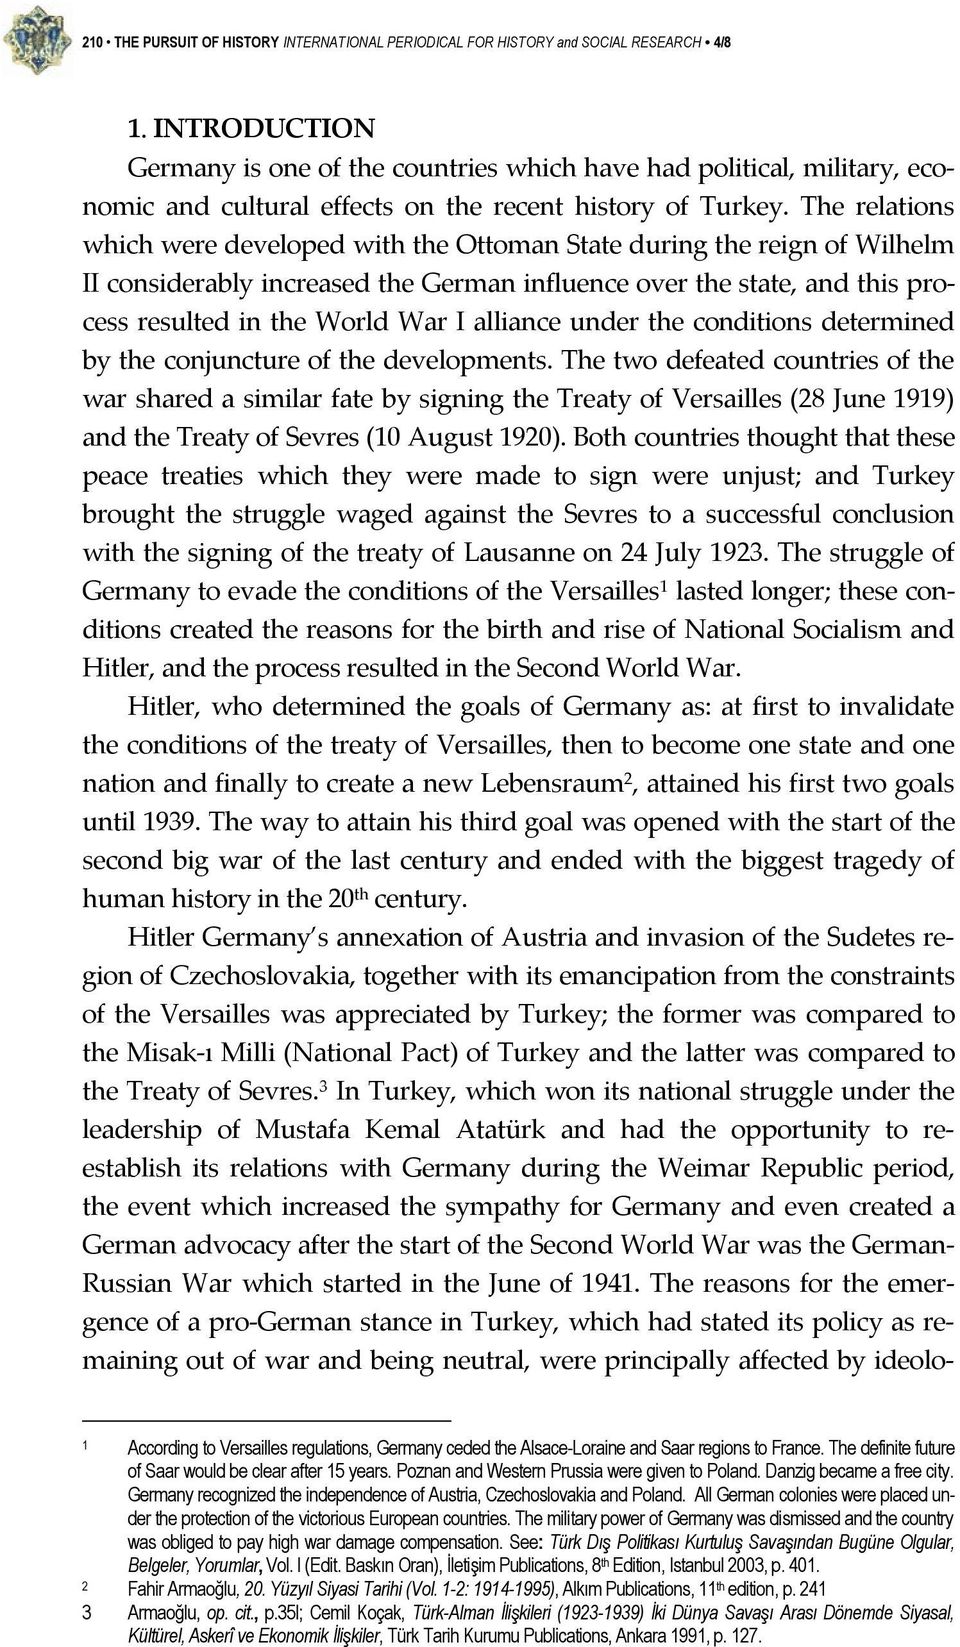 The relations which were developed with the Ottoman State during the reign of Wilhelm II considerably increased the German influence over the state, and this process resulted in the World War I